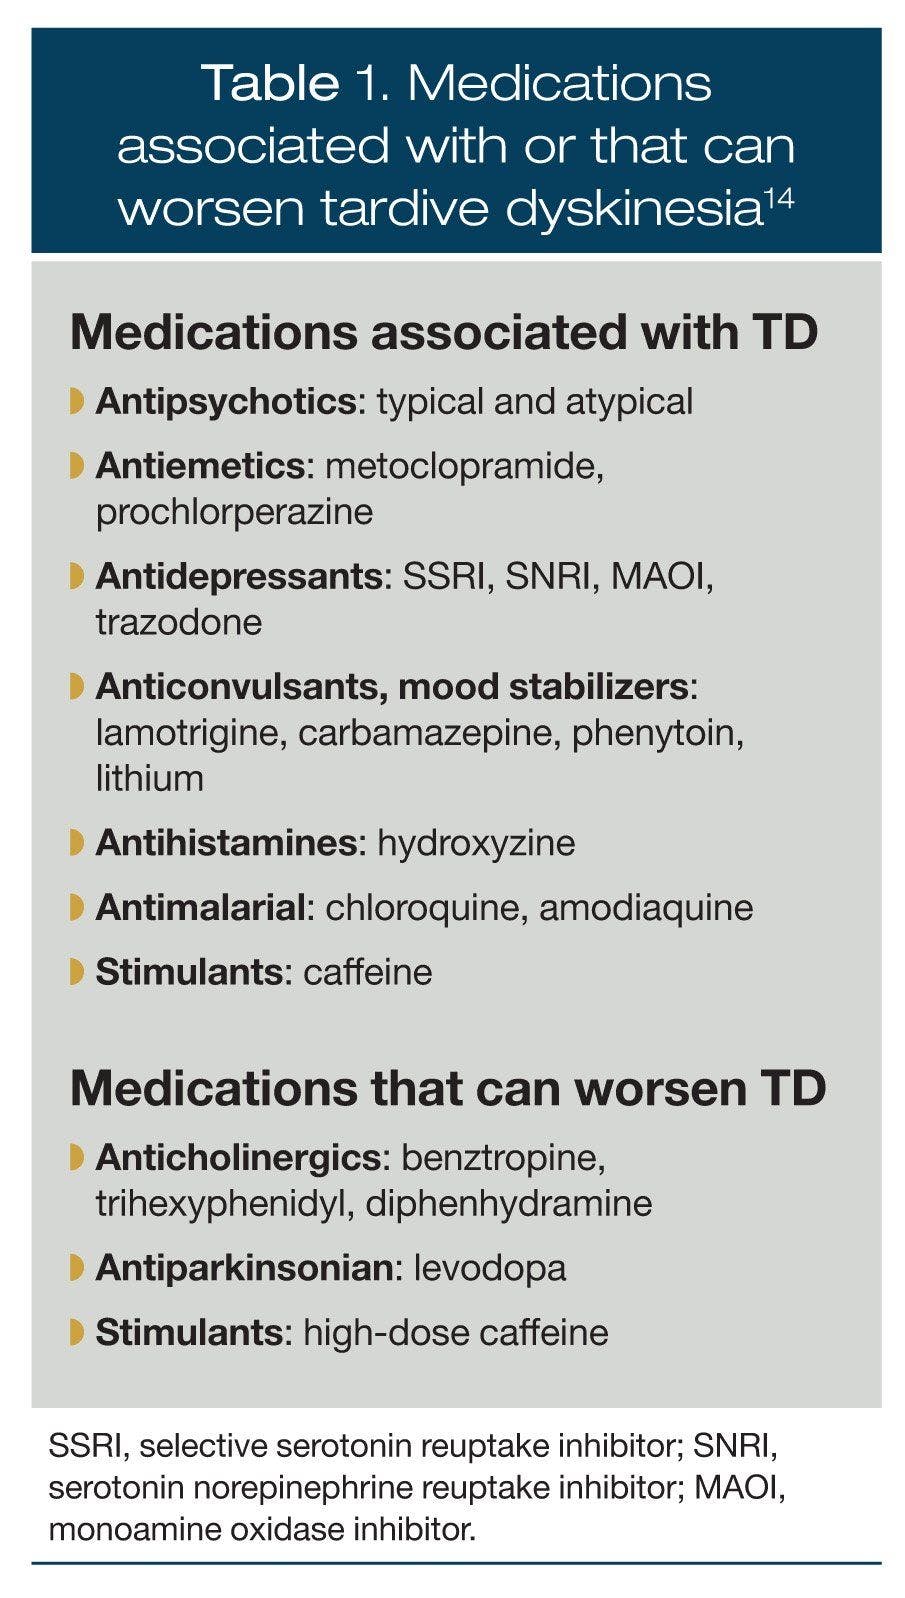 Medications associated with or that can worsen tardive dyskinesia